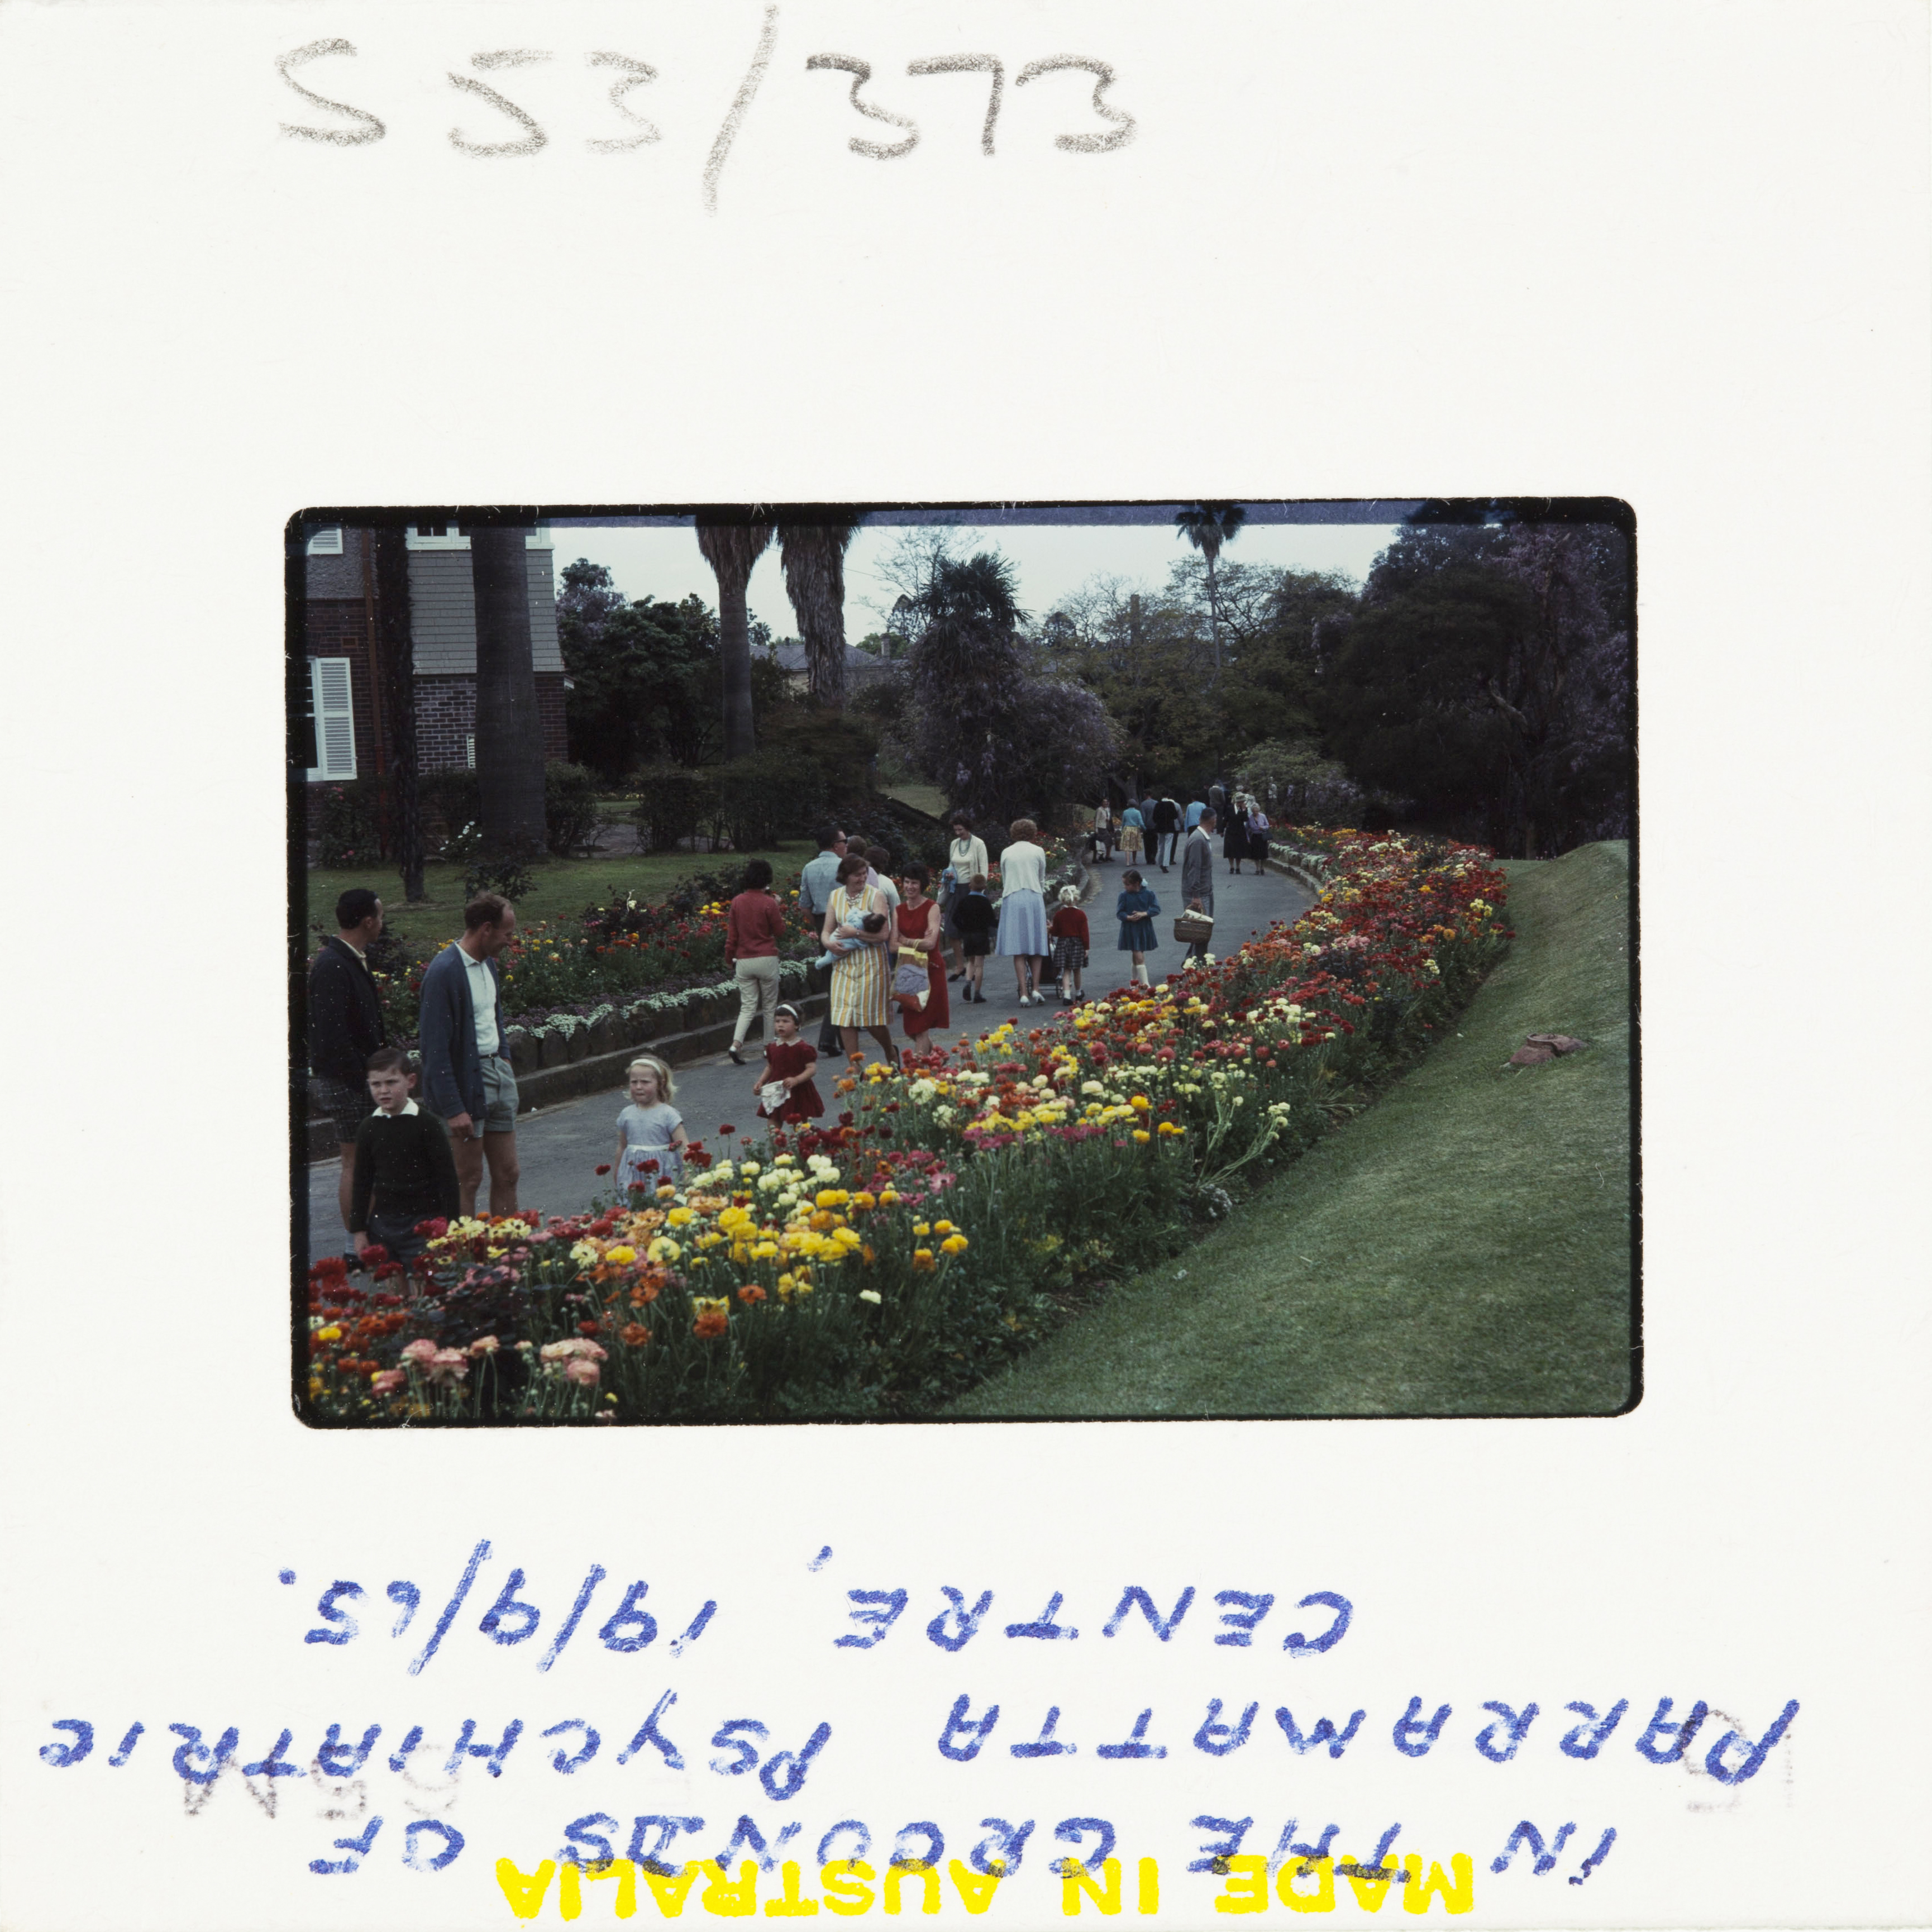 A 60s Kodak colour slide showing people walking down a path with flower beds on either side. 